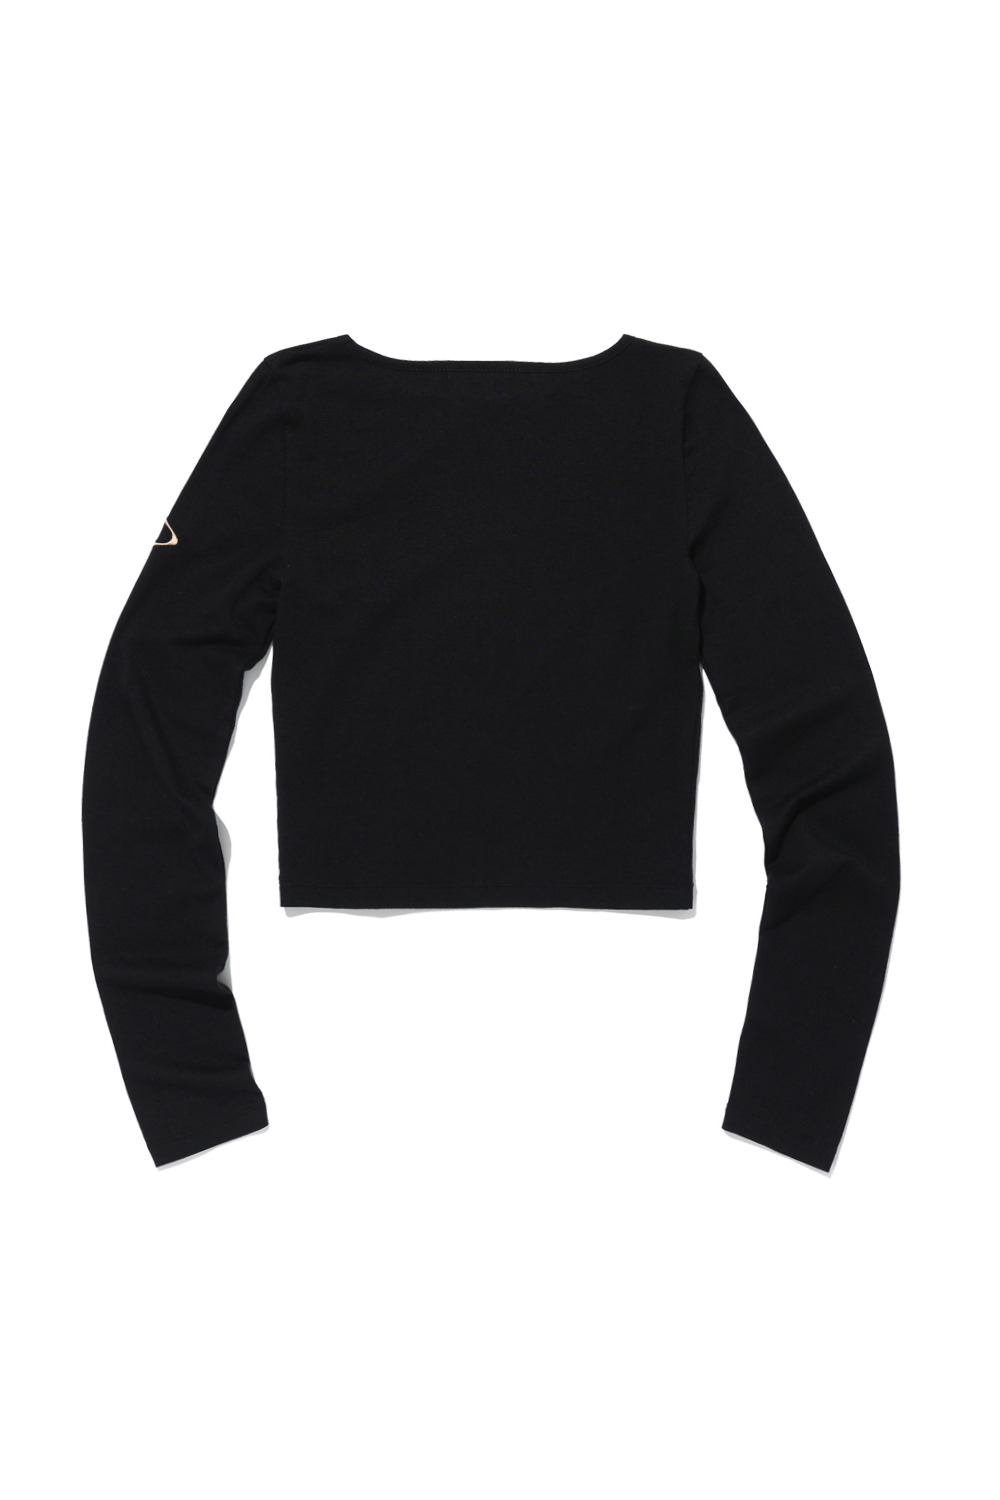 FRONT DARTED BASIC LONG SLEEVE TOP_BLACK - MISCHIEF